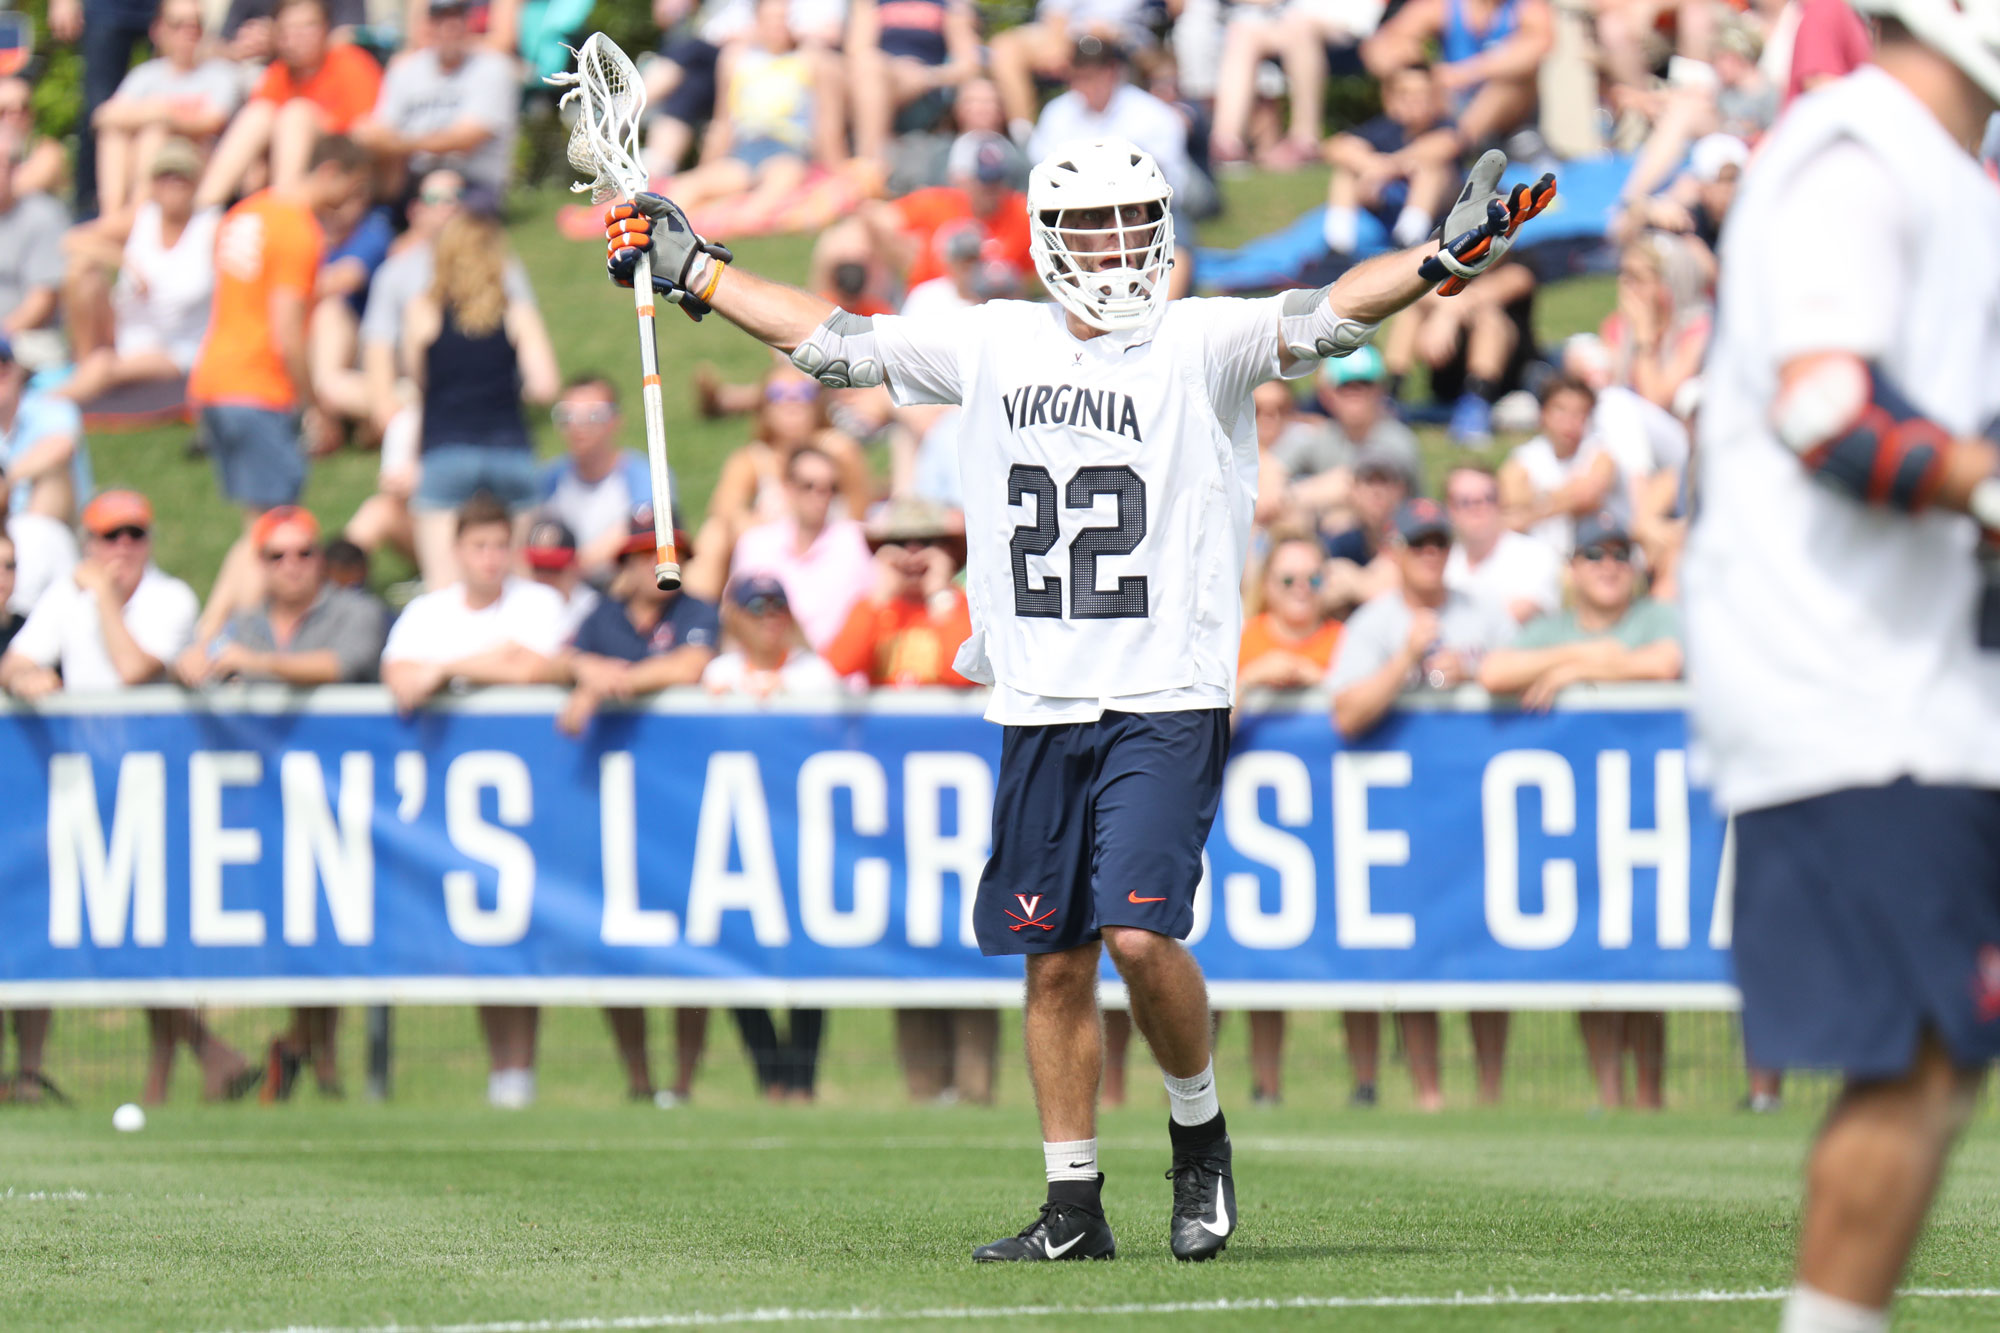 Matt Riley has his hands out wide in UVA lacrosse uniform on field during a game